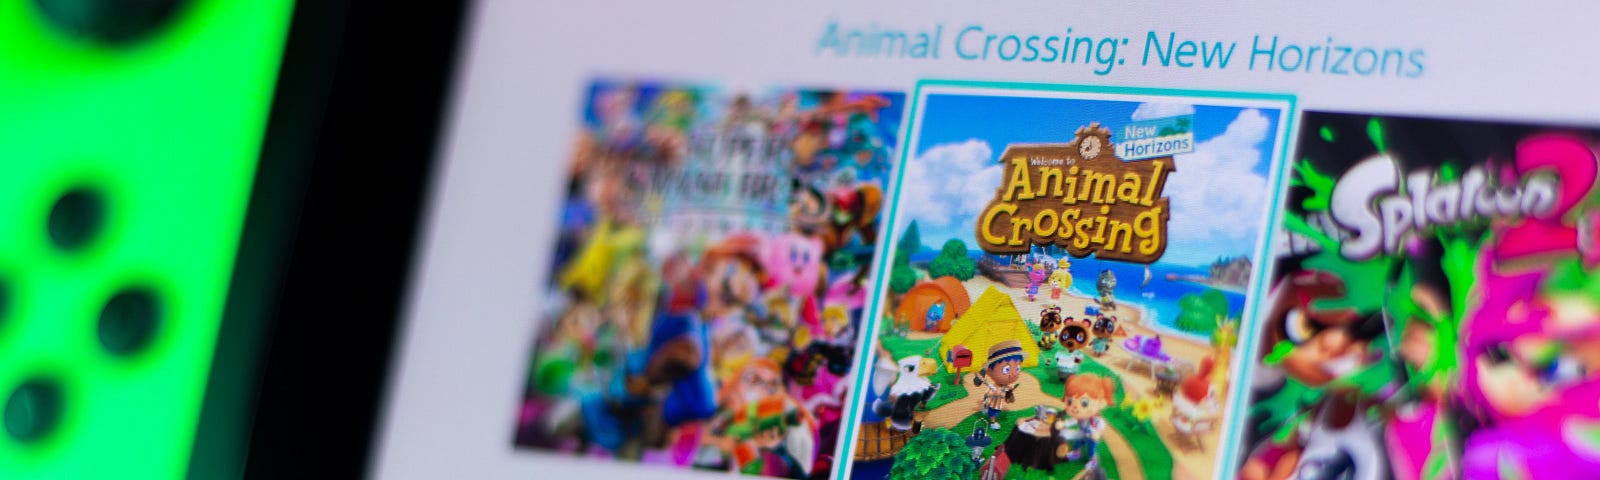 A photo of a Nintendo Switch menu. “Animal Crossing: New Horizons” is highlighted.